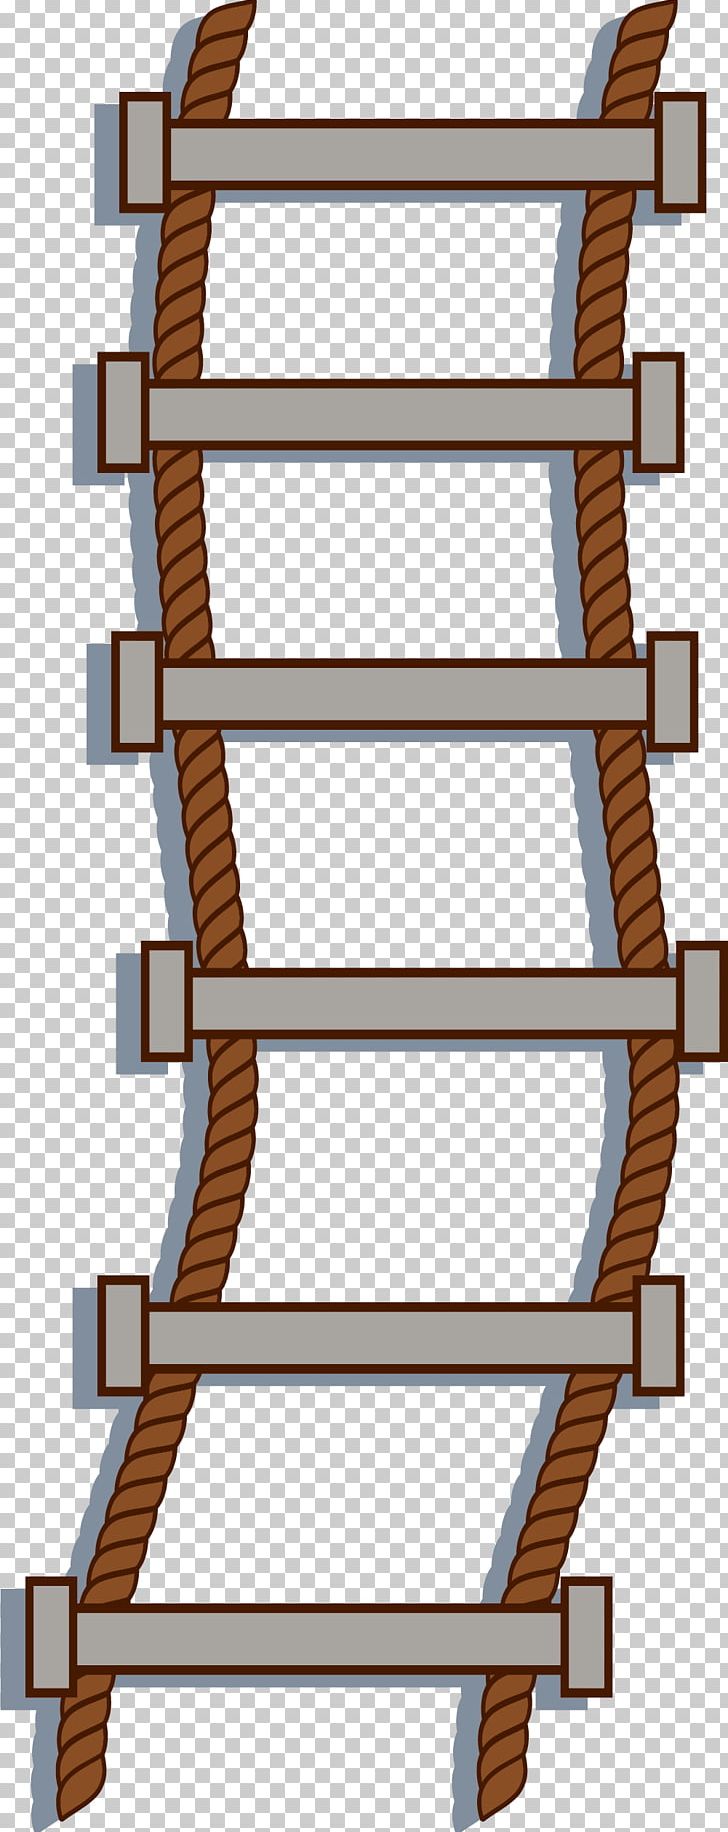 Ladder Stairs Repstege PNG, Clipart, Angle, Cartoon Ladder, Designer, Encapsulated Postscript, Facade Free PNG Download